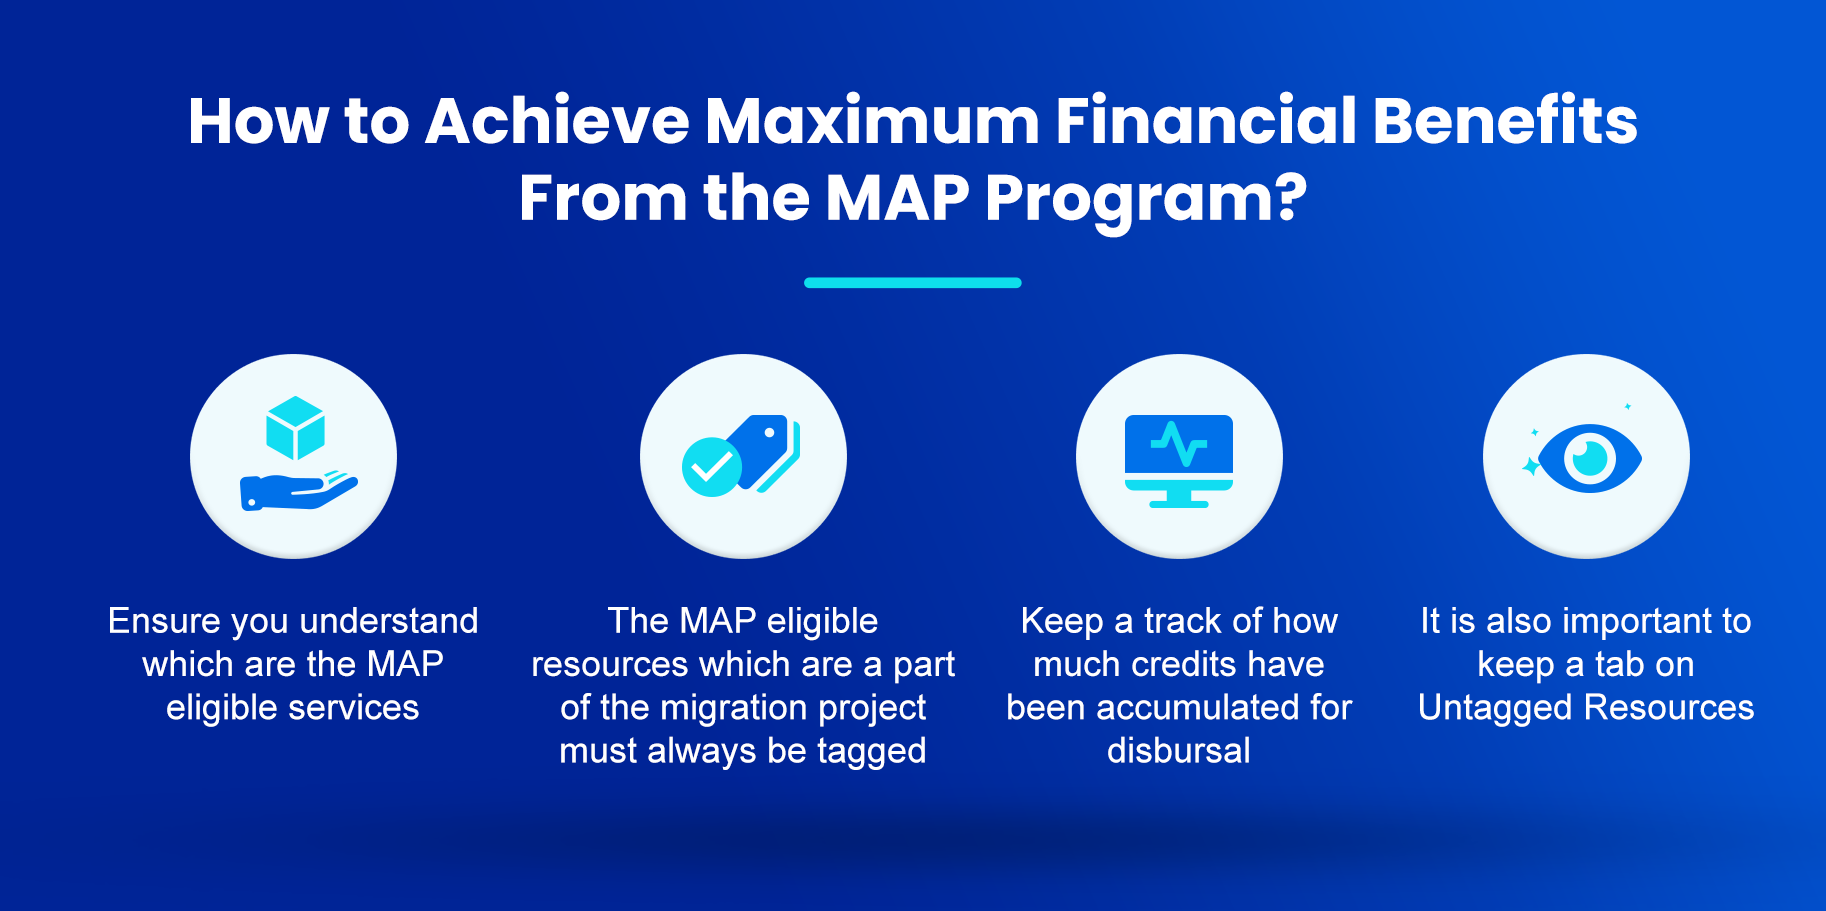 How to achieve maximum financial benefits from the MAP Program